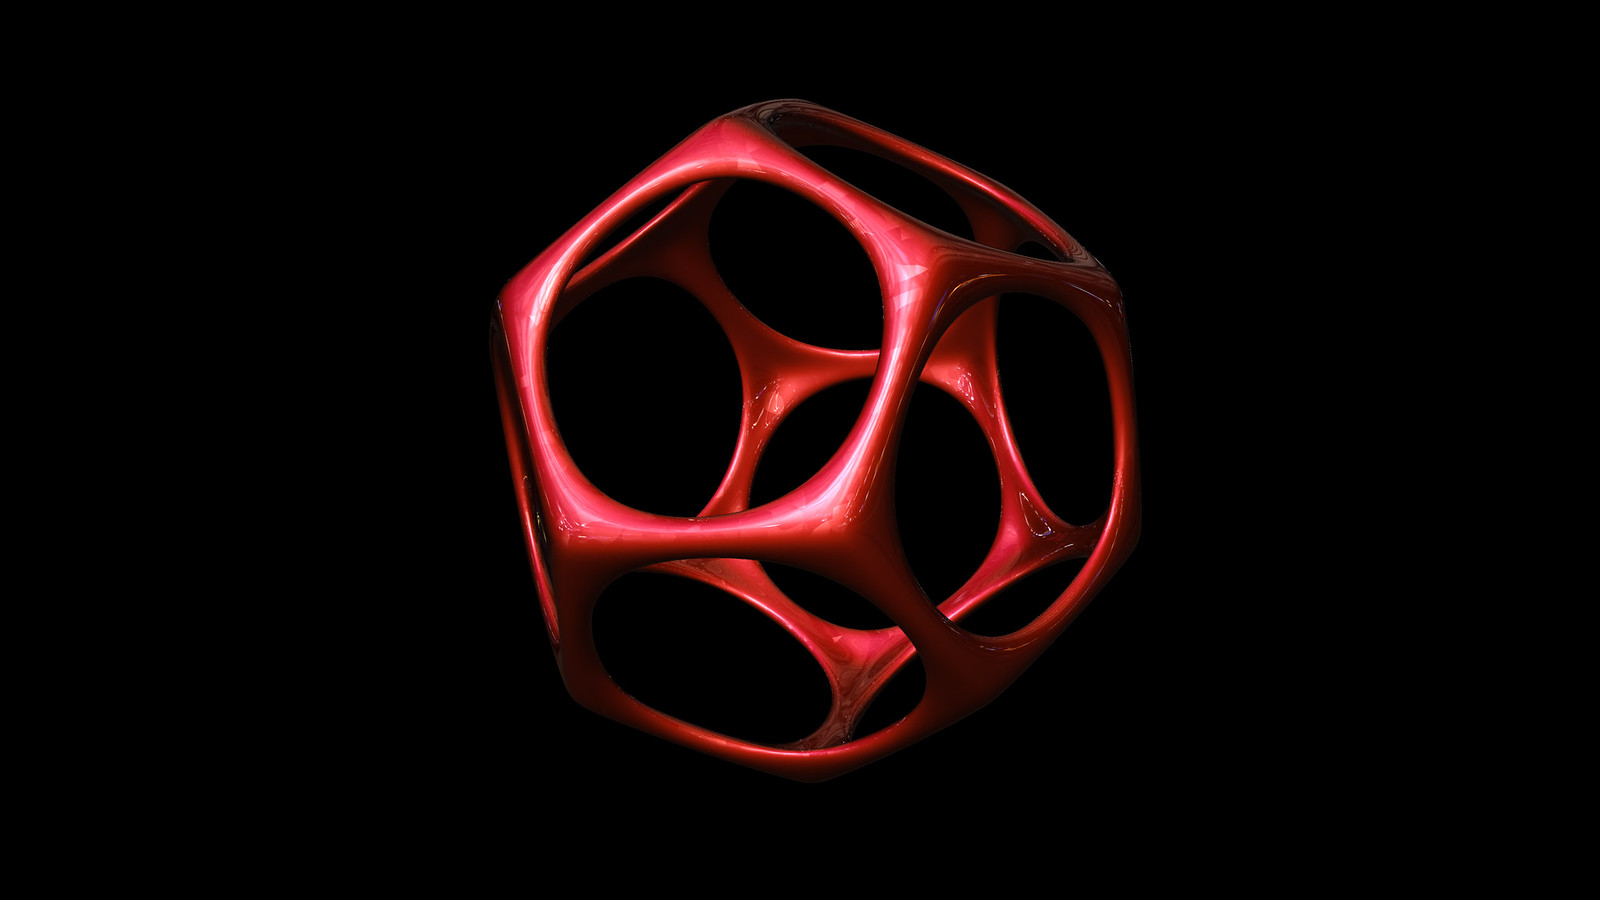 Dodecahedron soft